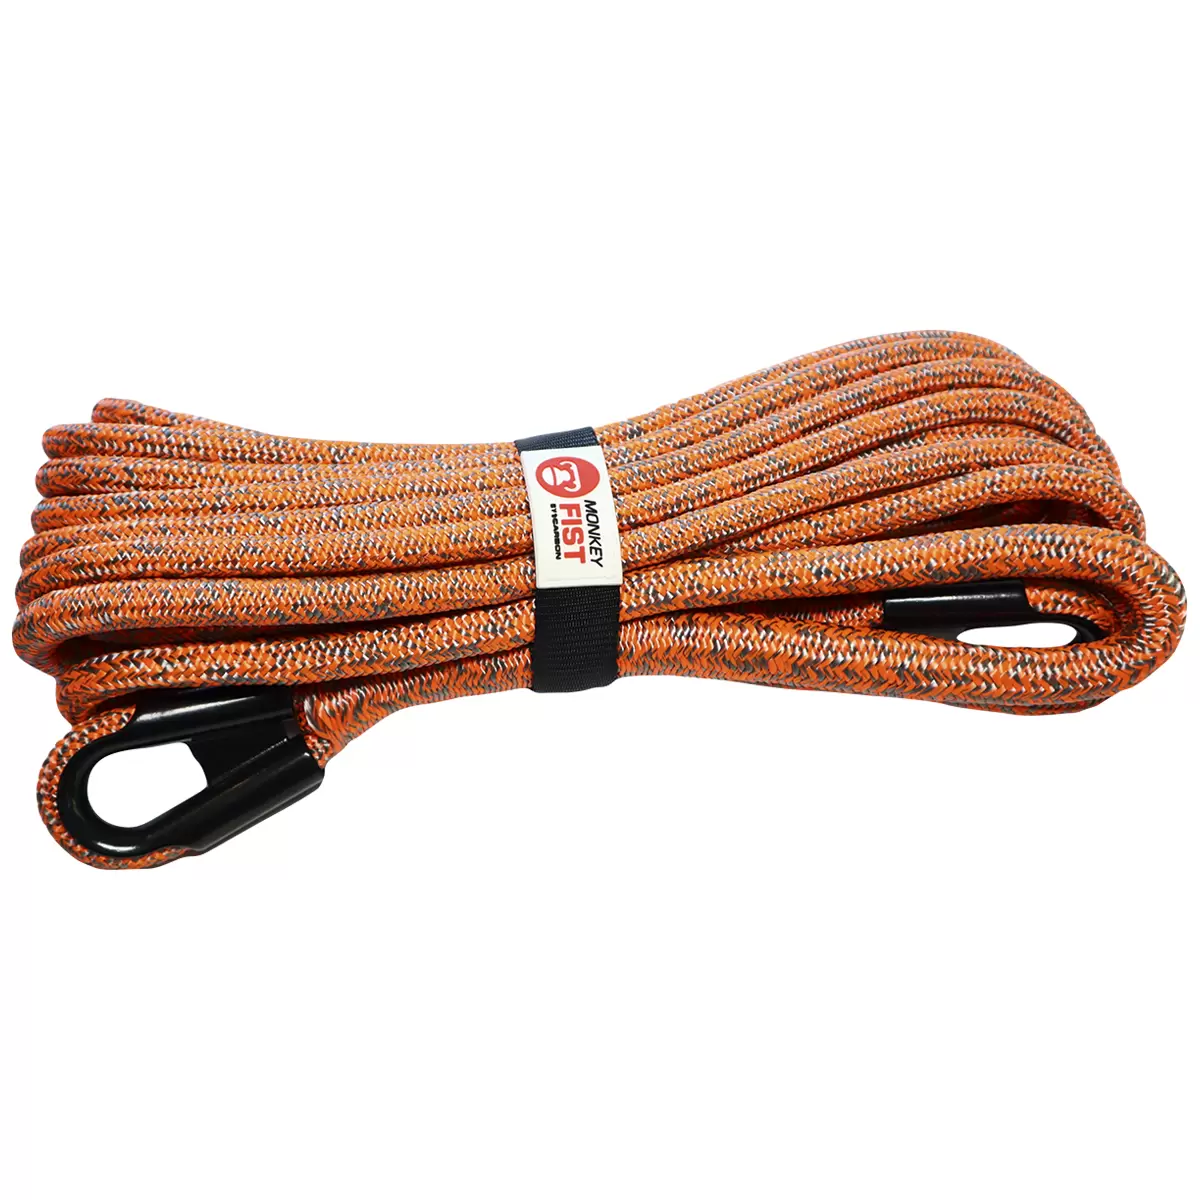 Carbon Offroad Monkey Fist Premium 7T x 10M Braided Winch Extension Rope